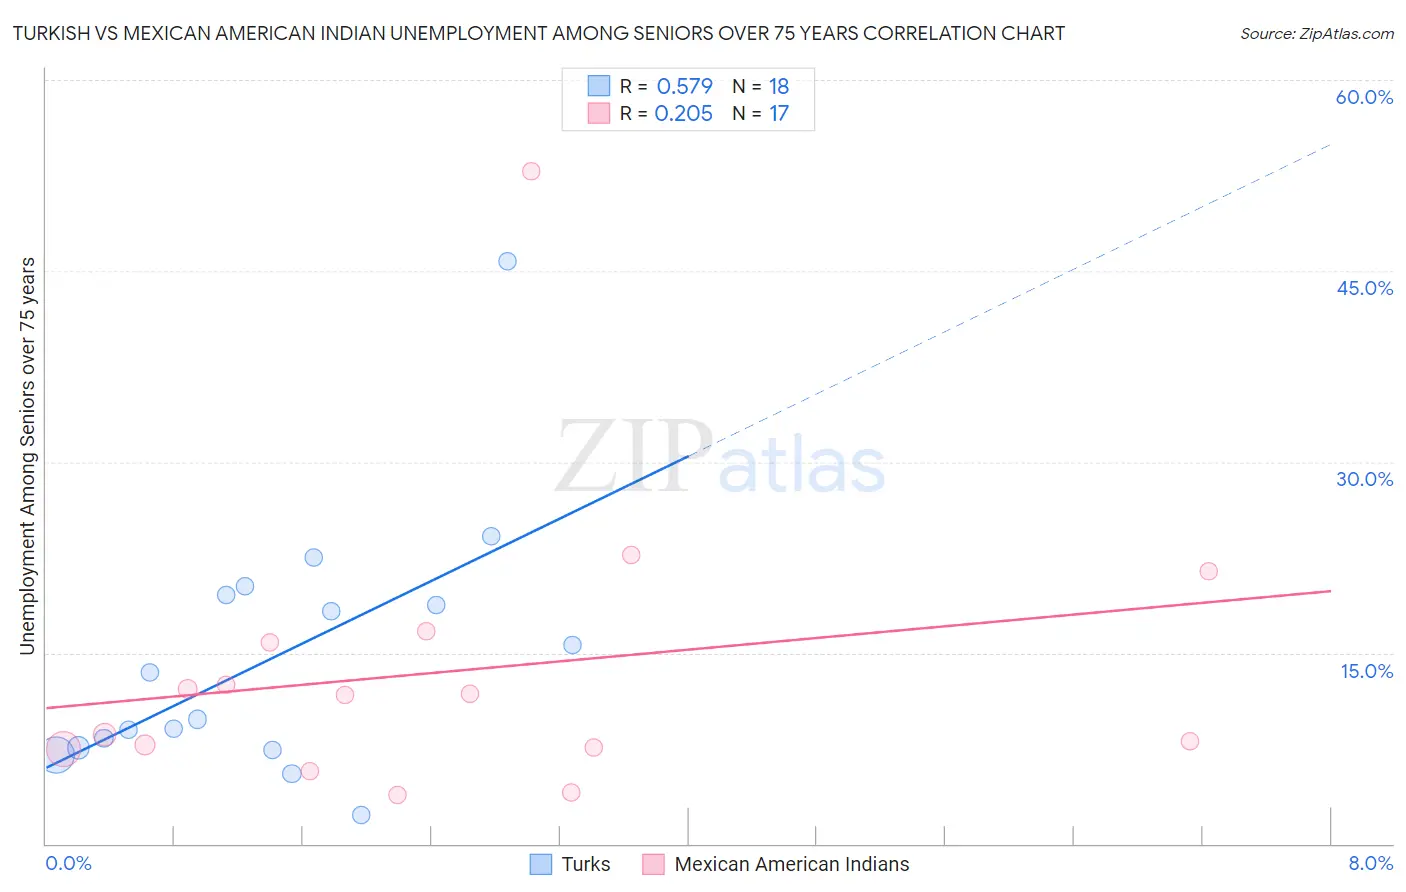 Turkish vs Mexican American Indian Unemployment Among Seniors over 75 years